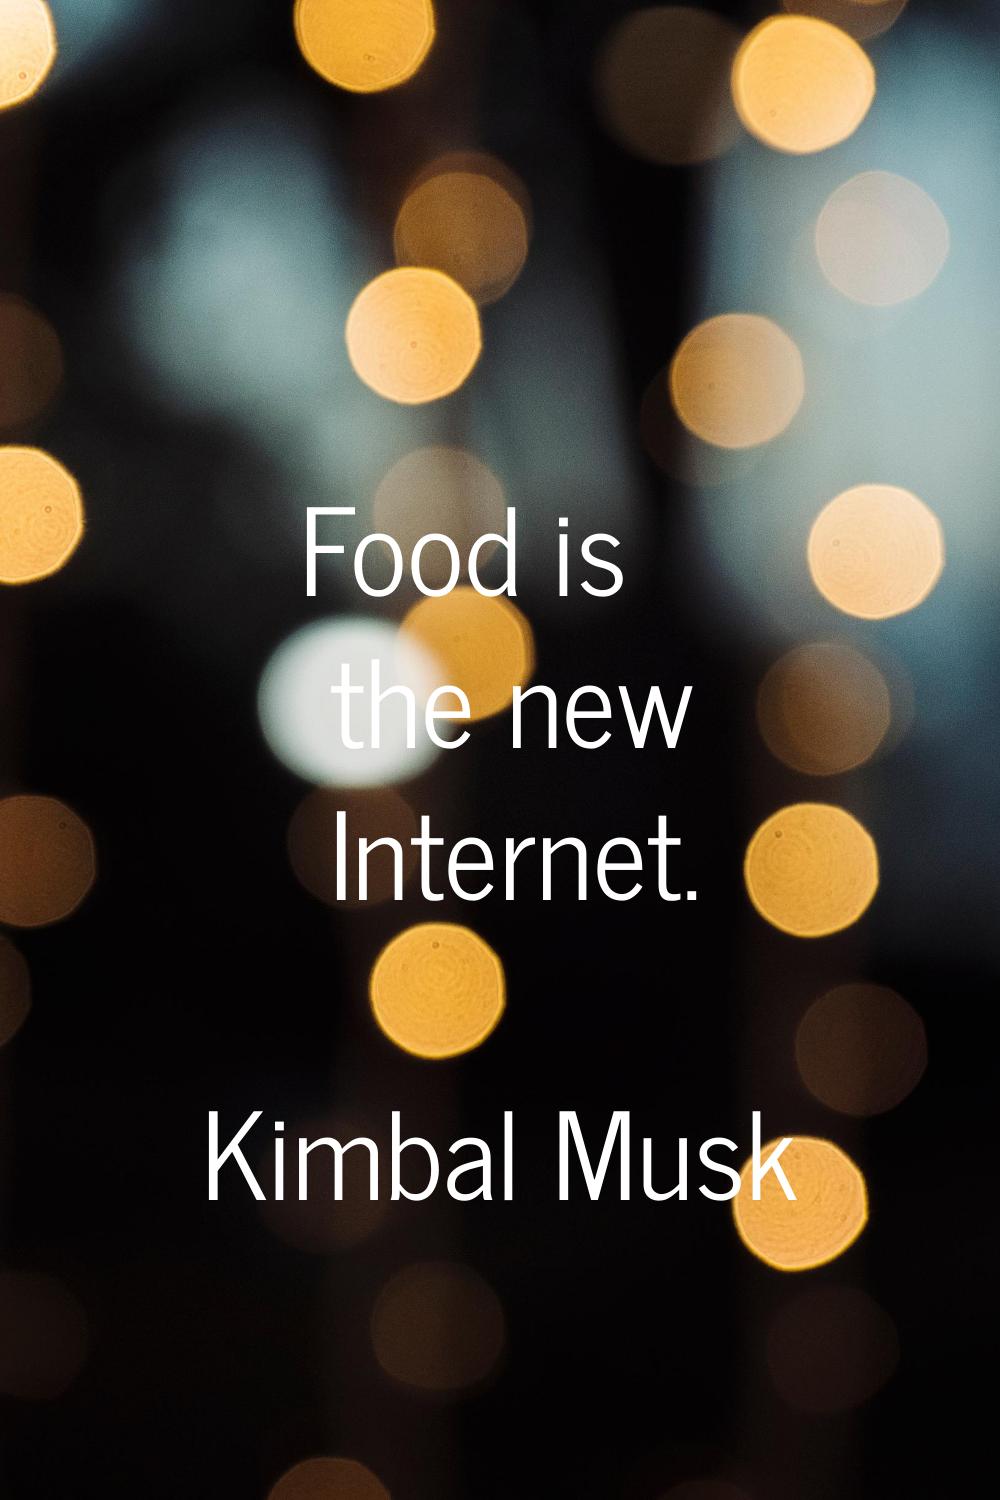 Food is the new Internet.